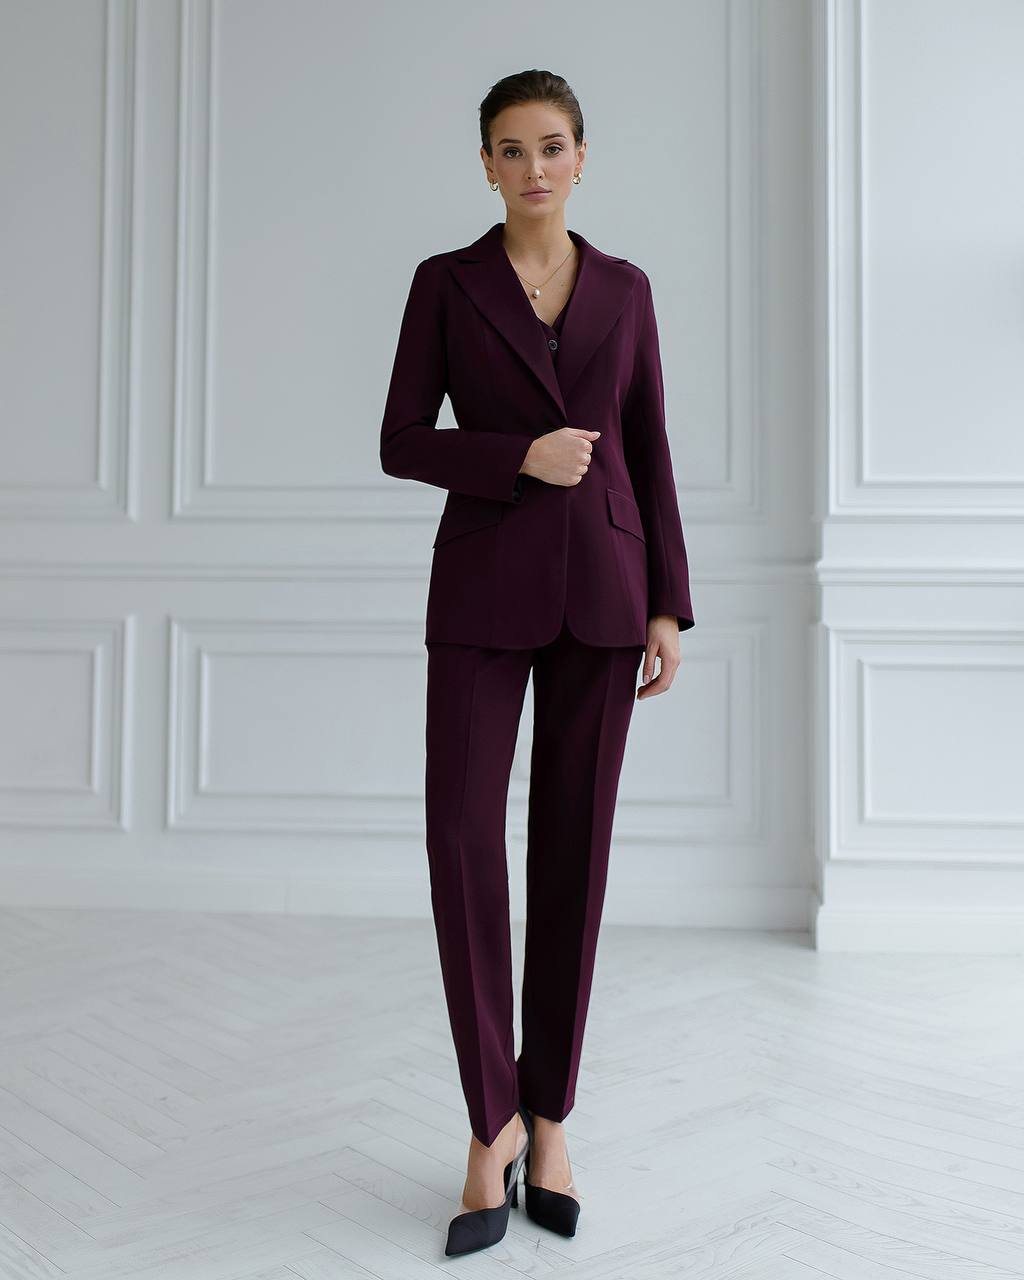 a woman wearing a purple suit and black shoes